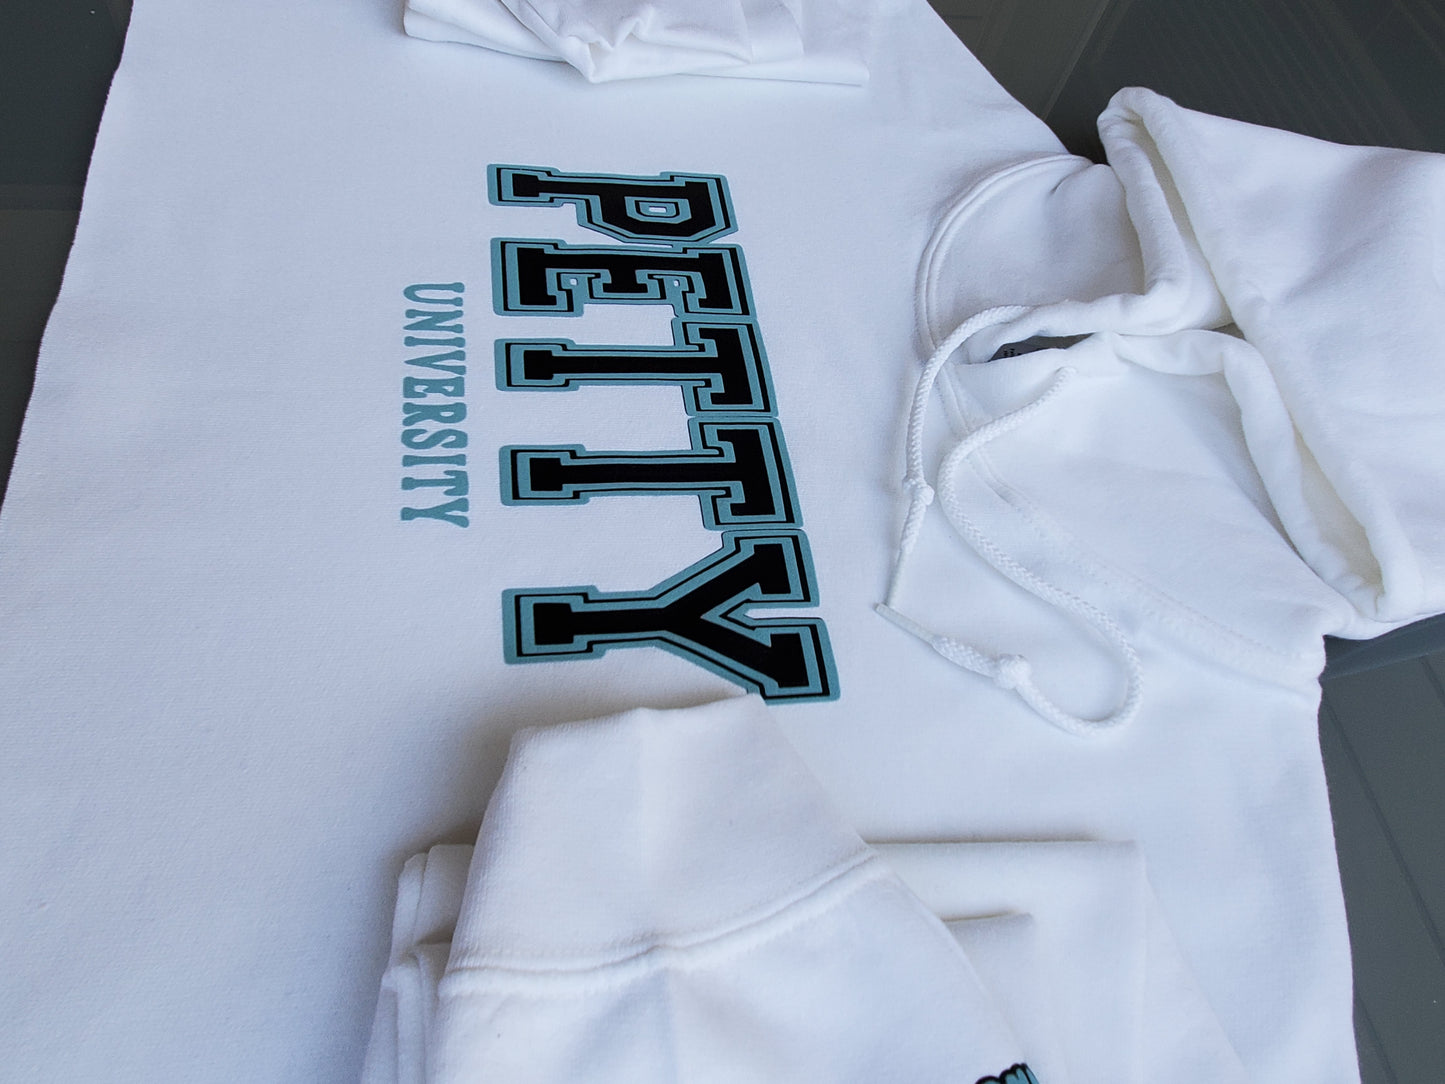 Petty University Cropped Hoodie - Centre Ave Clothing Co.